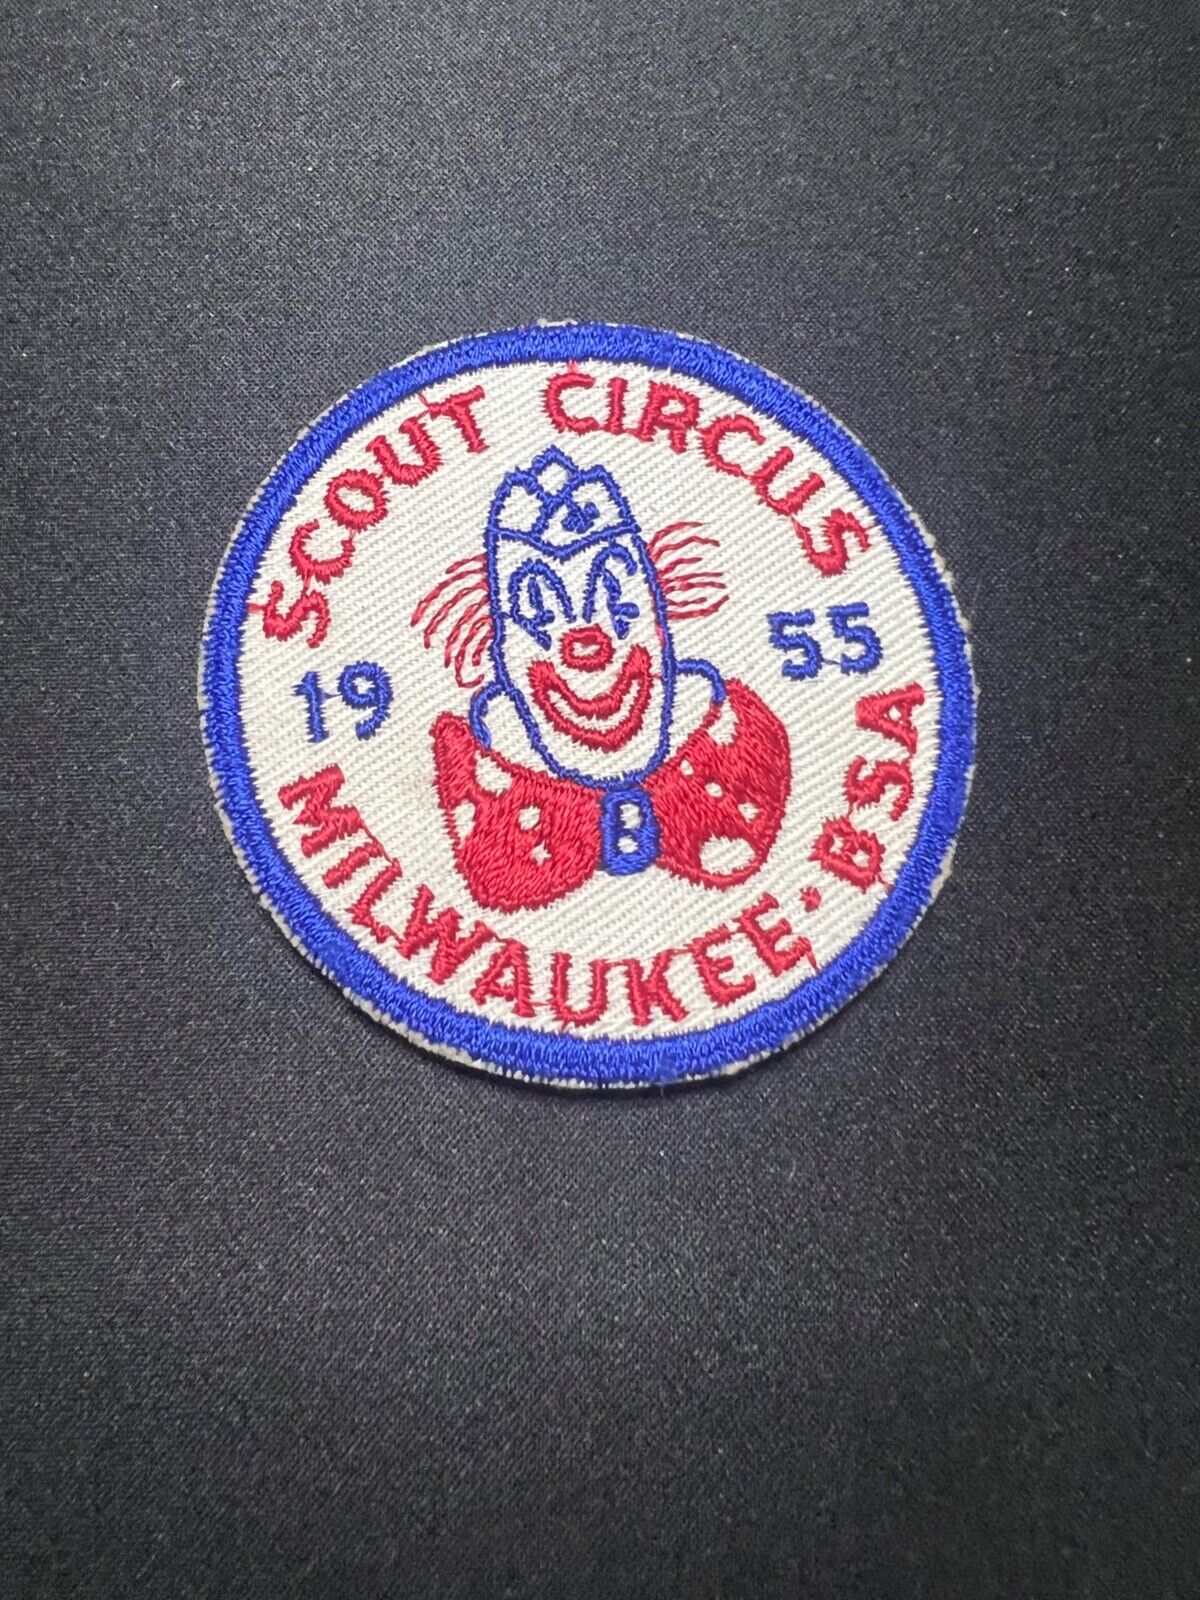 1955 Boy Scouts Scout Circus Milwaukee BSA Clown Patch Round Red White Blue